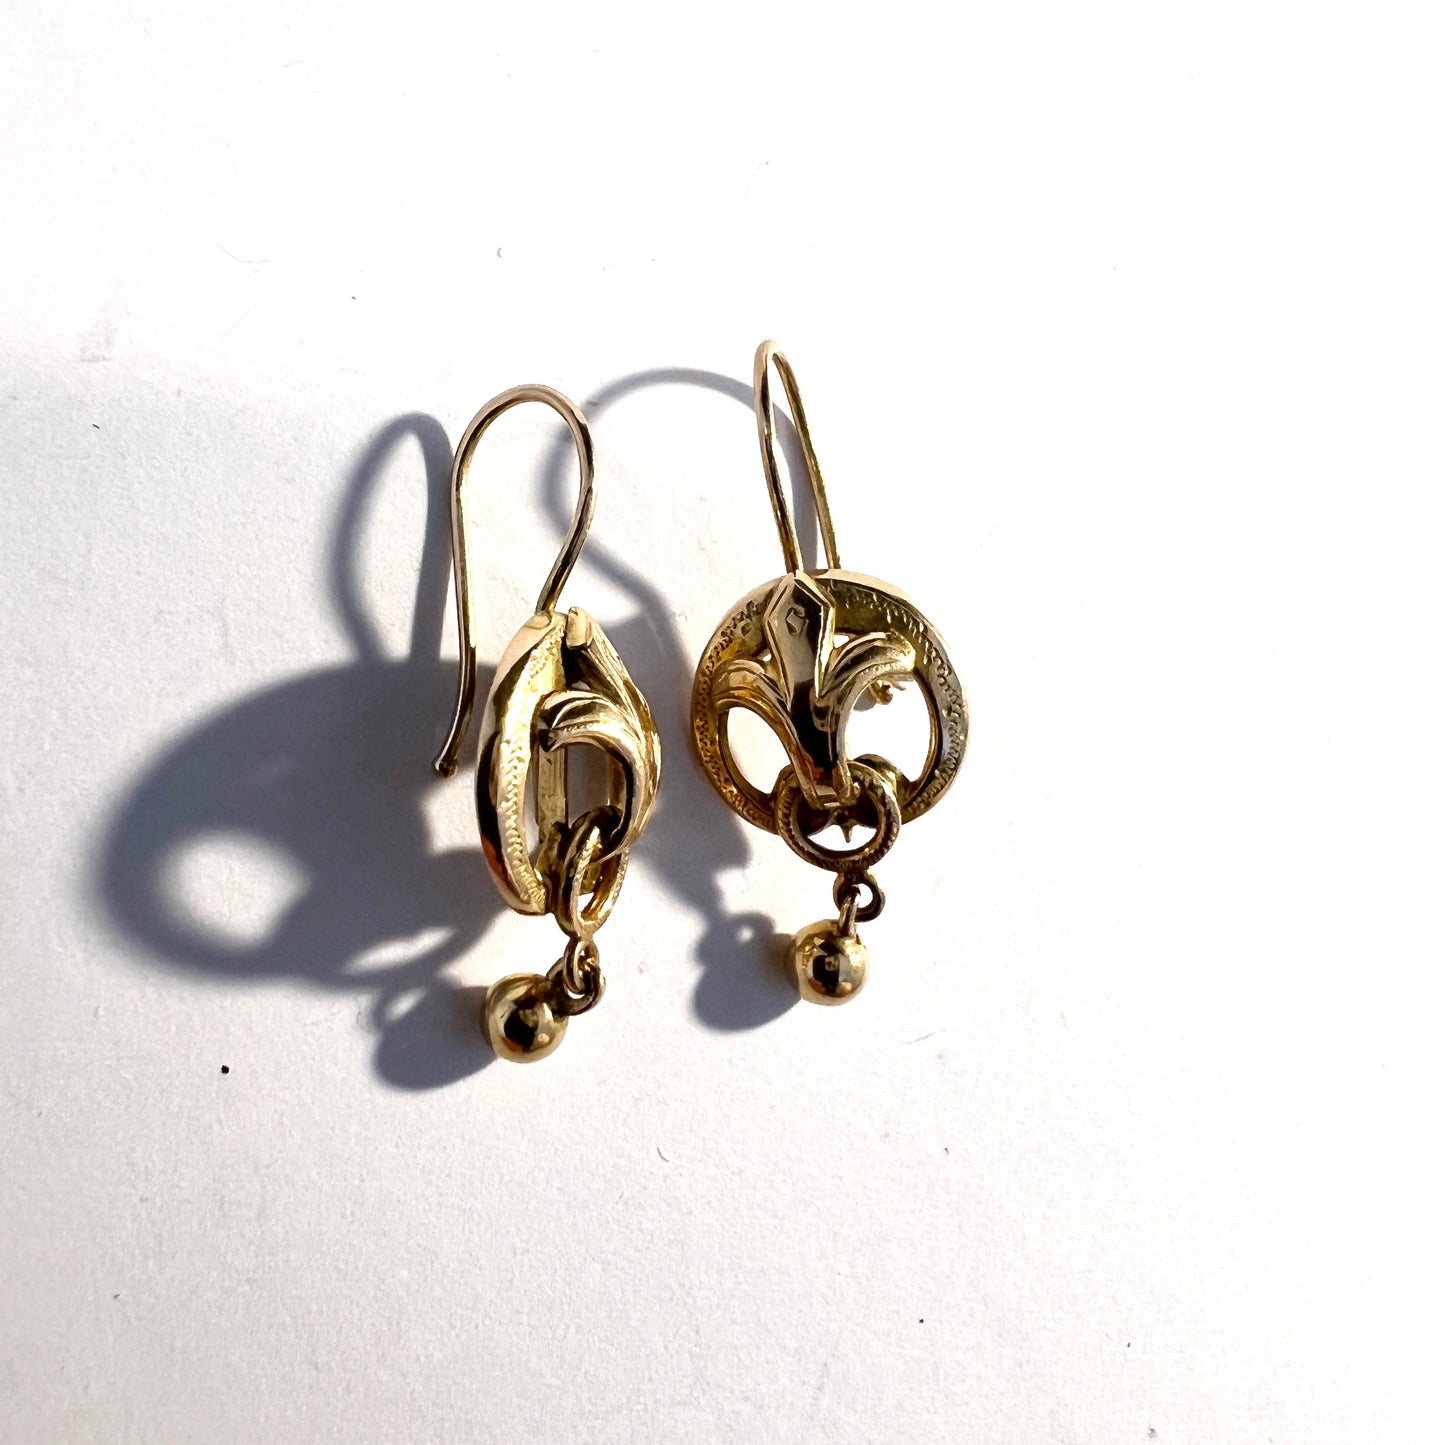 Antique c year 1900. 18k Gold Earrings. Possibly France.